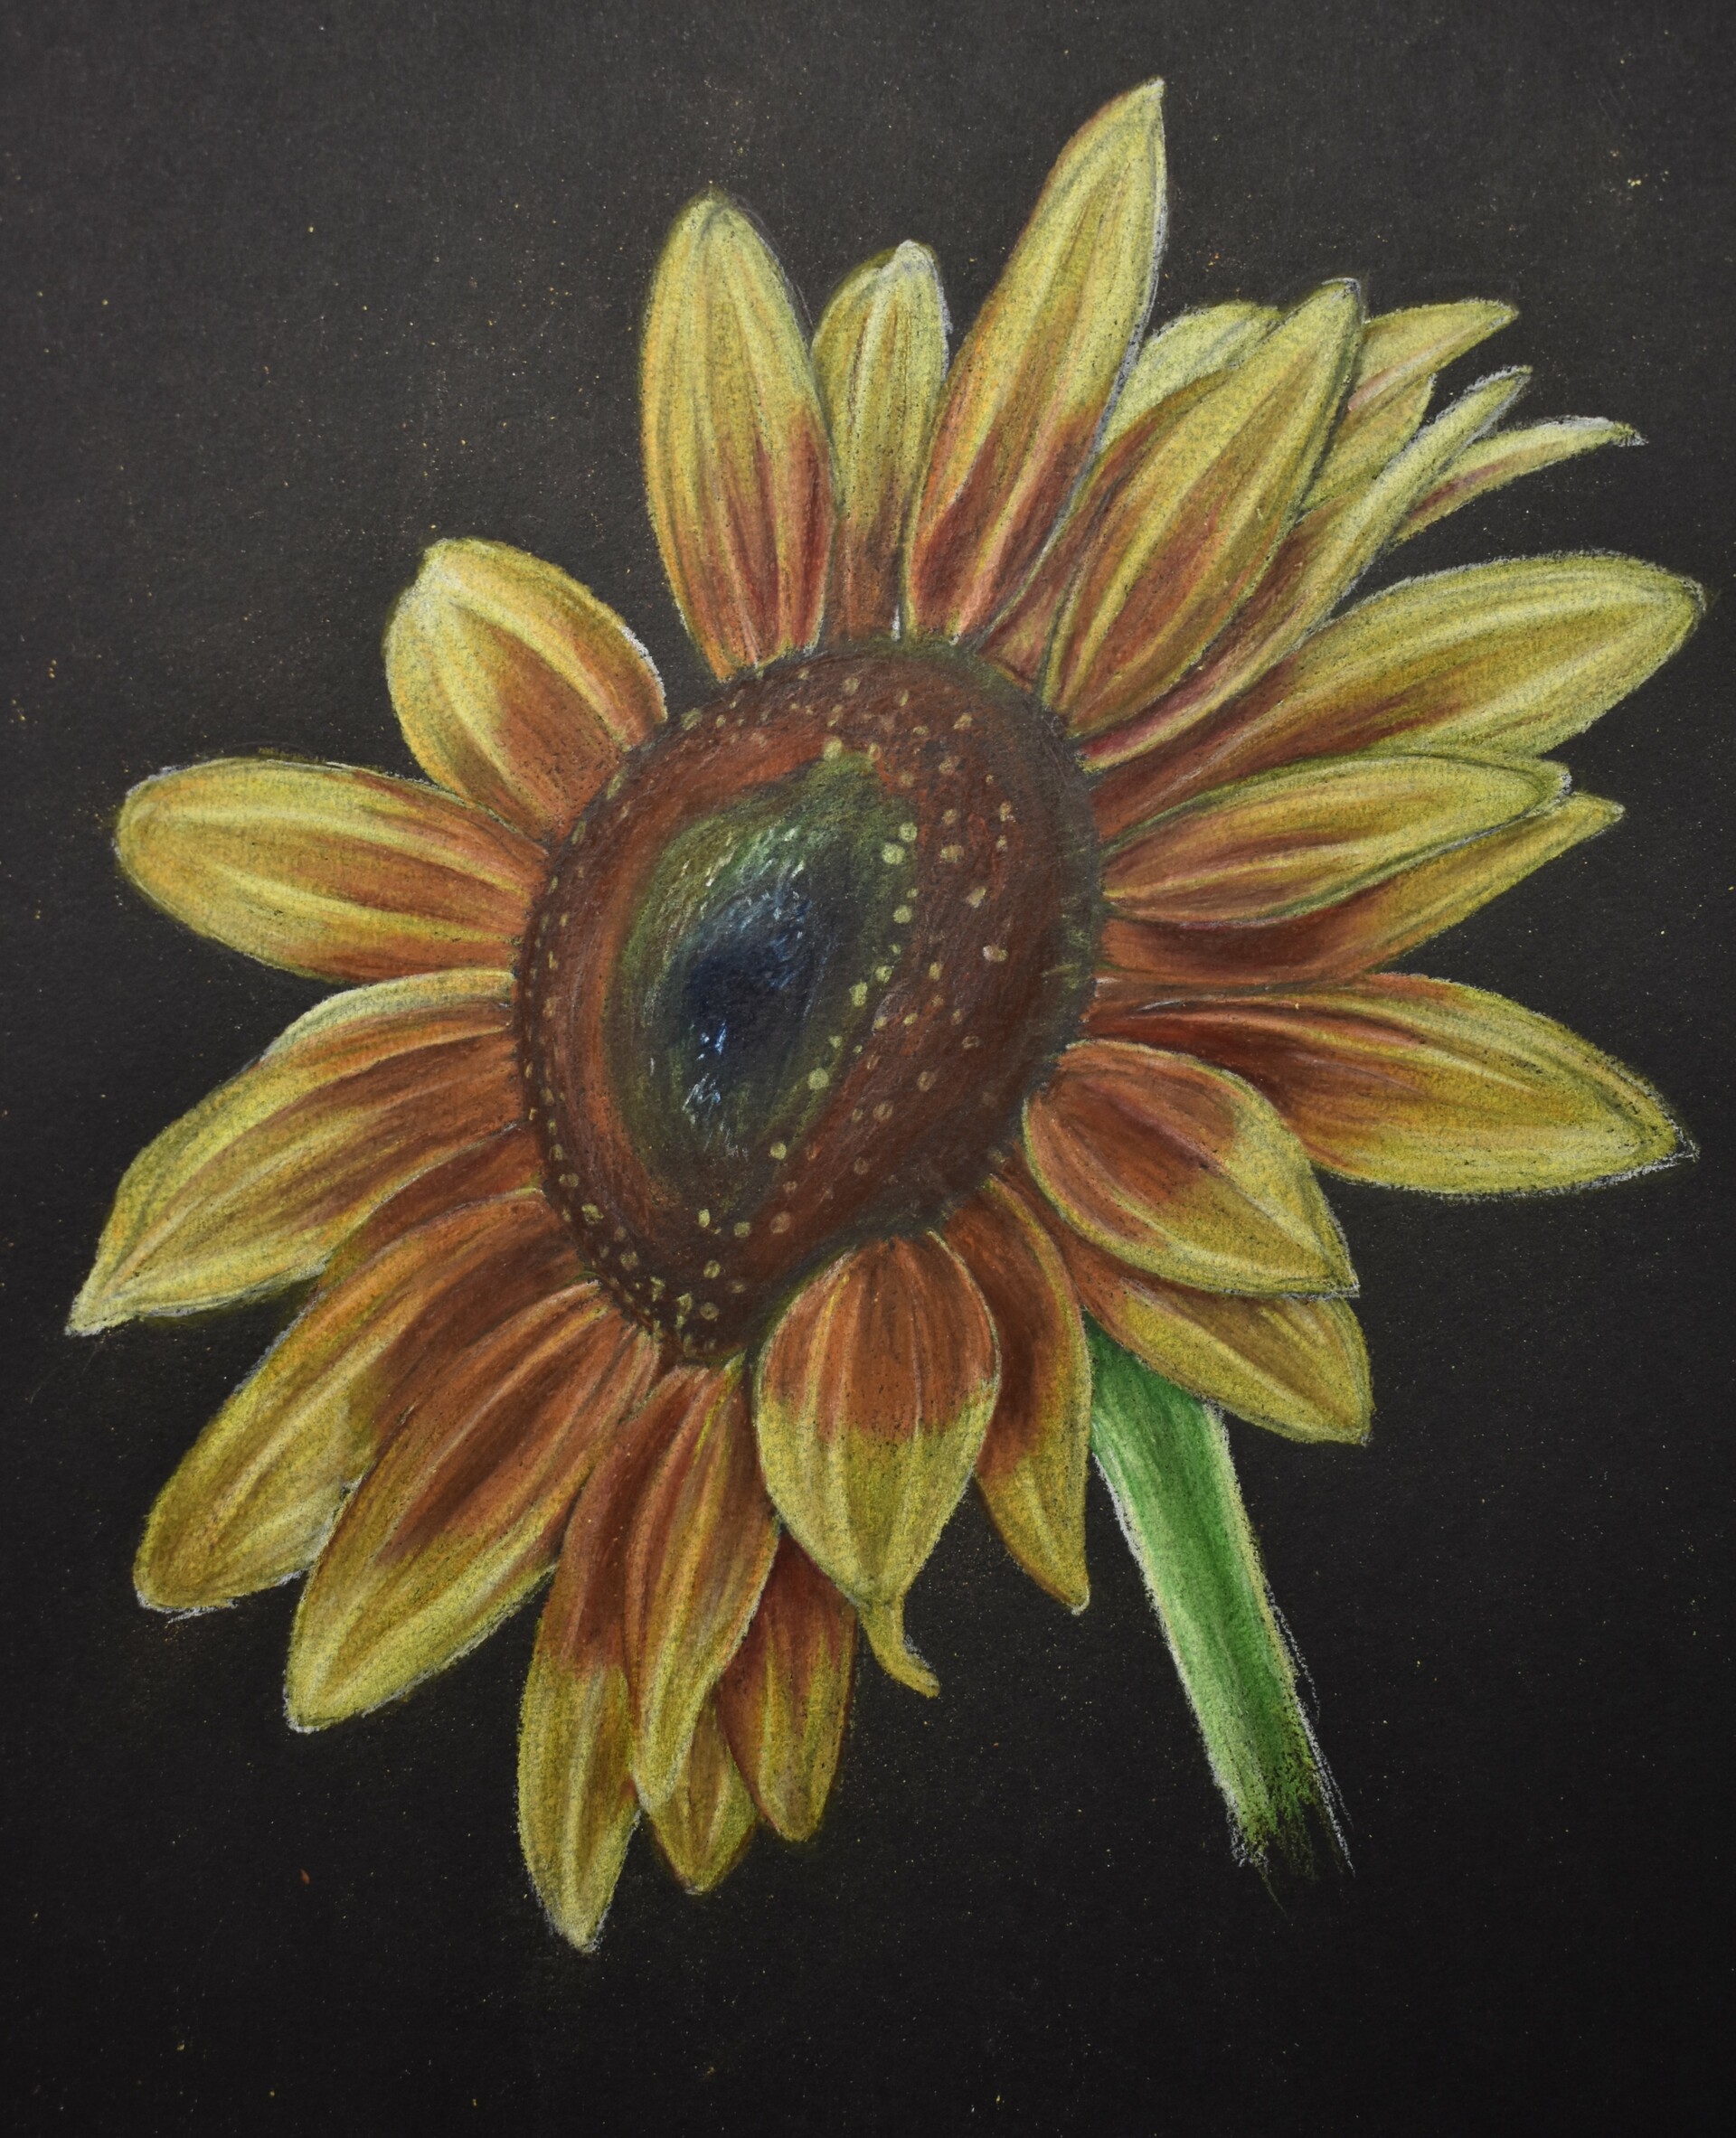 How To Draw A Sunflower Easy Step by Step - Smiling Colors